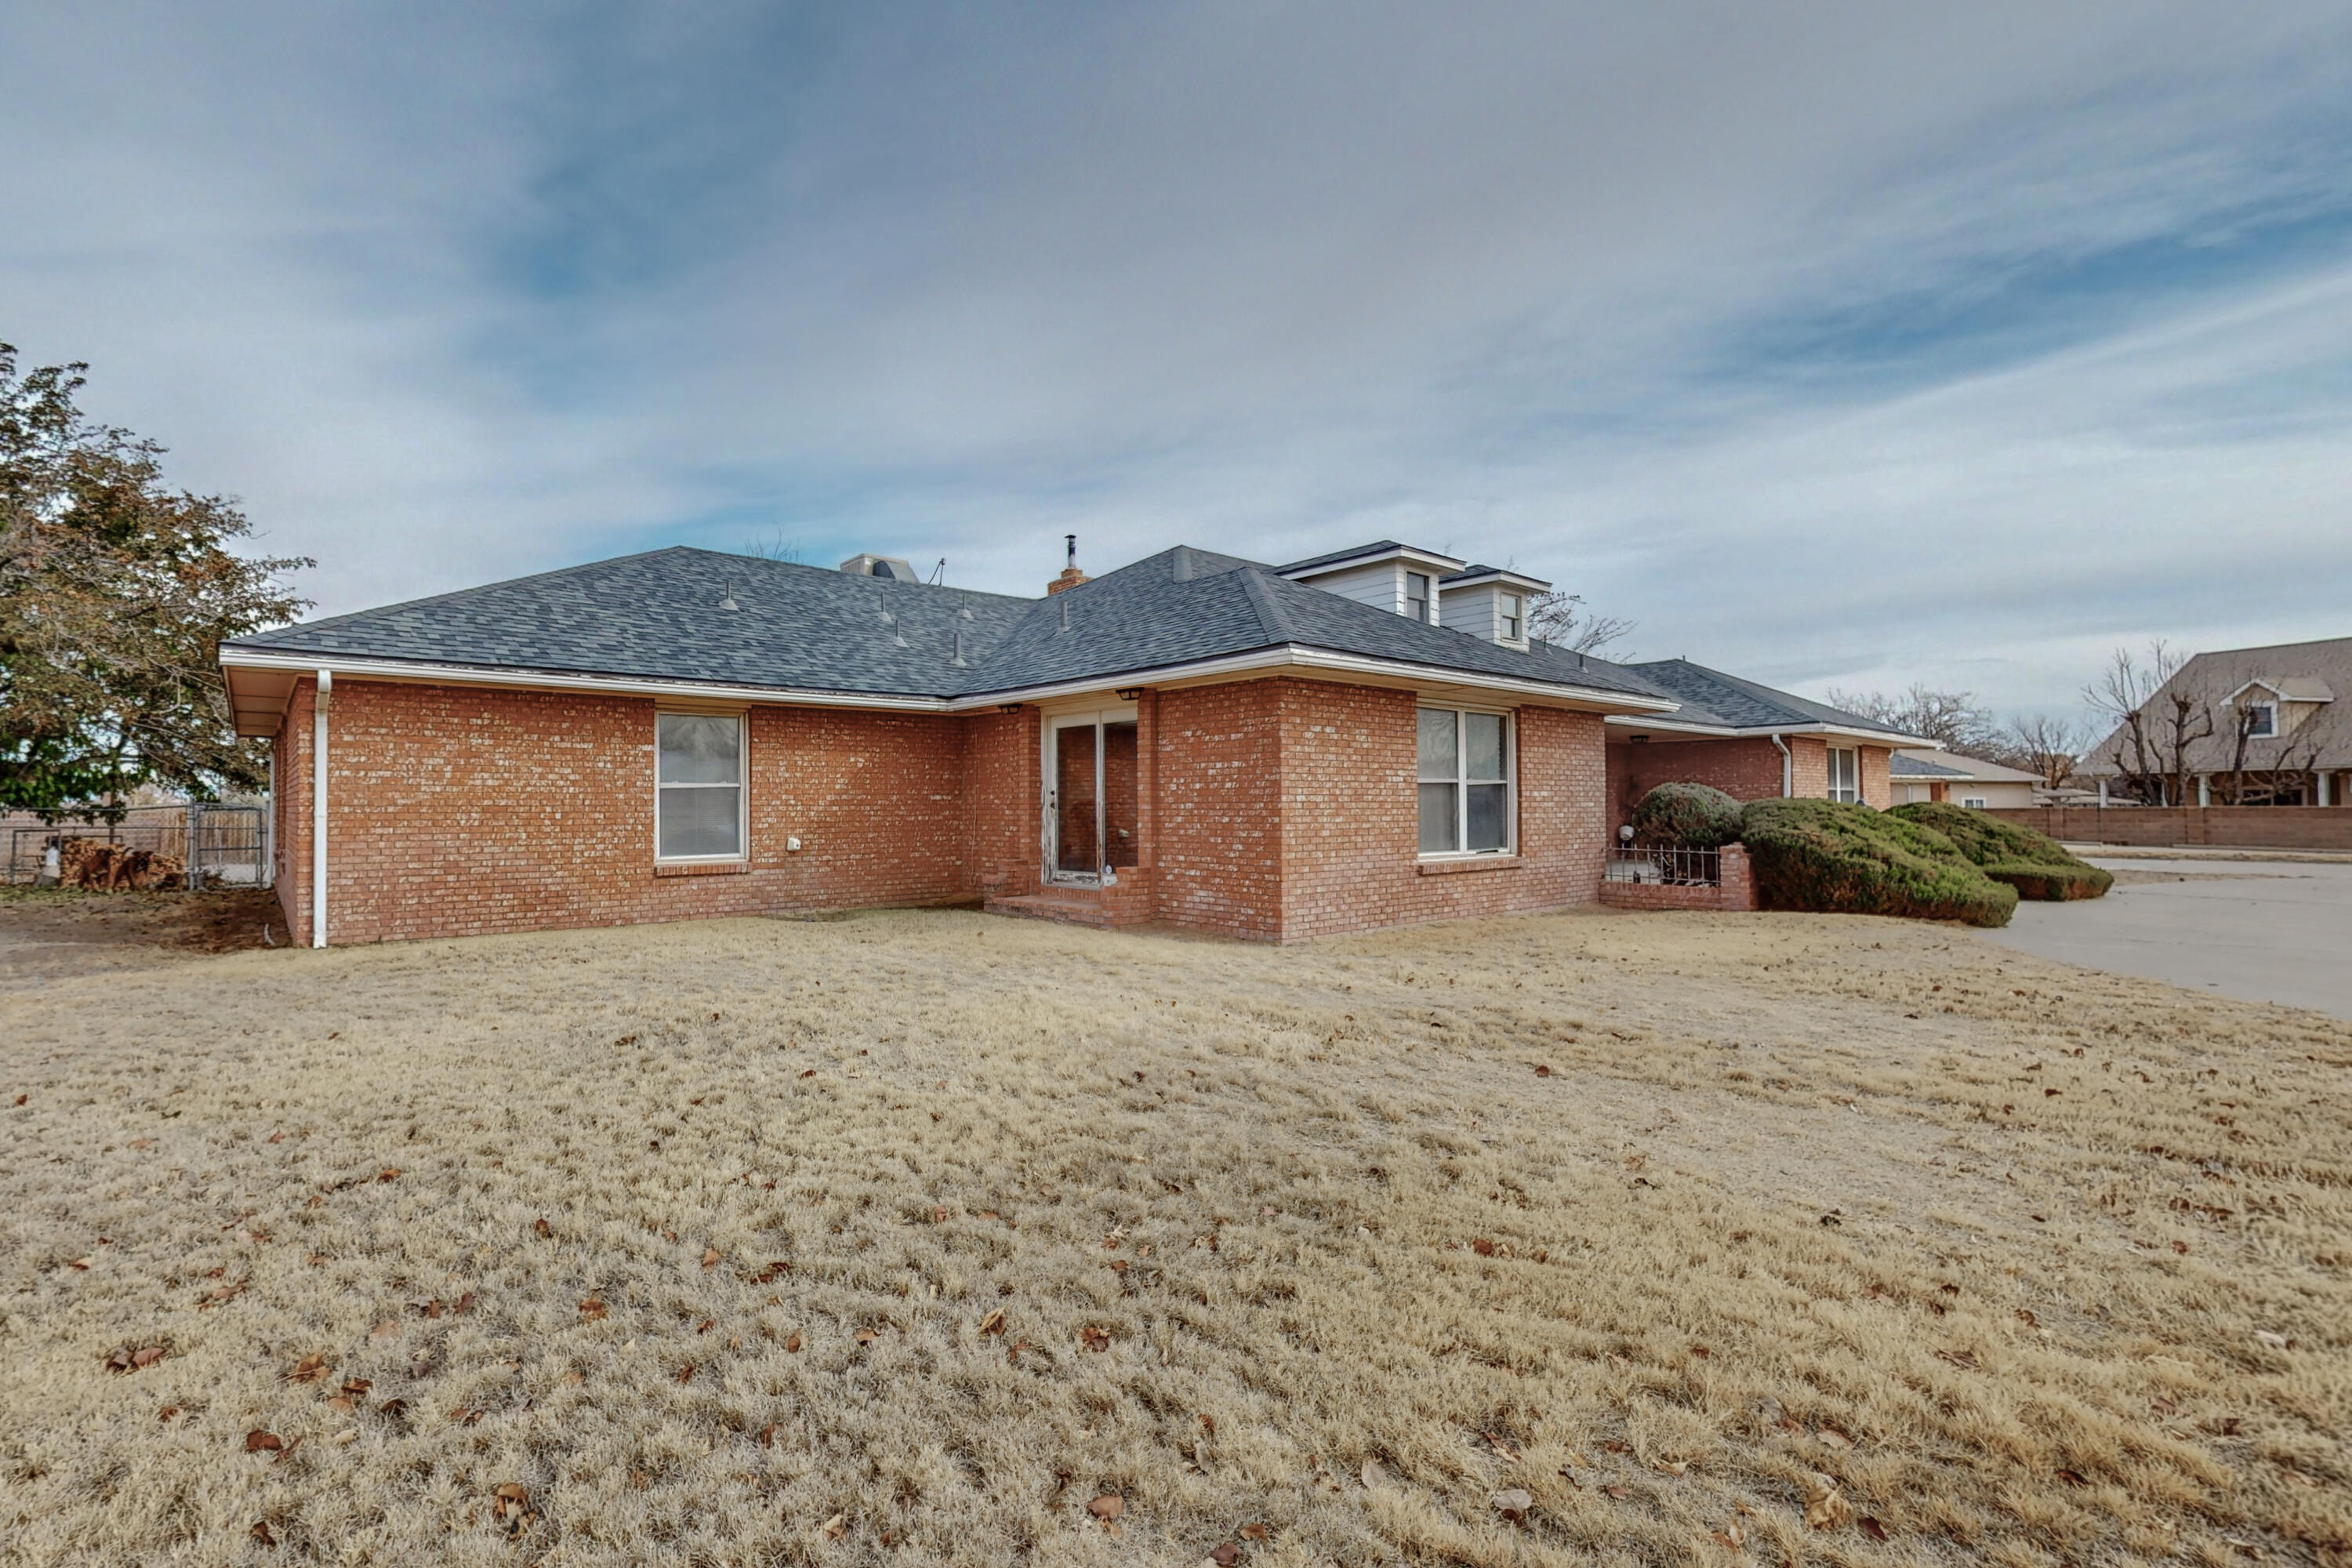 502 Ladera Drive, Belen, New Mexico 87002, 4 Bedrooms Bedrooms, ,3 BathroomsBathrooms,Residential,For Sale,502 Ladera Drive,1049900